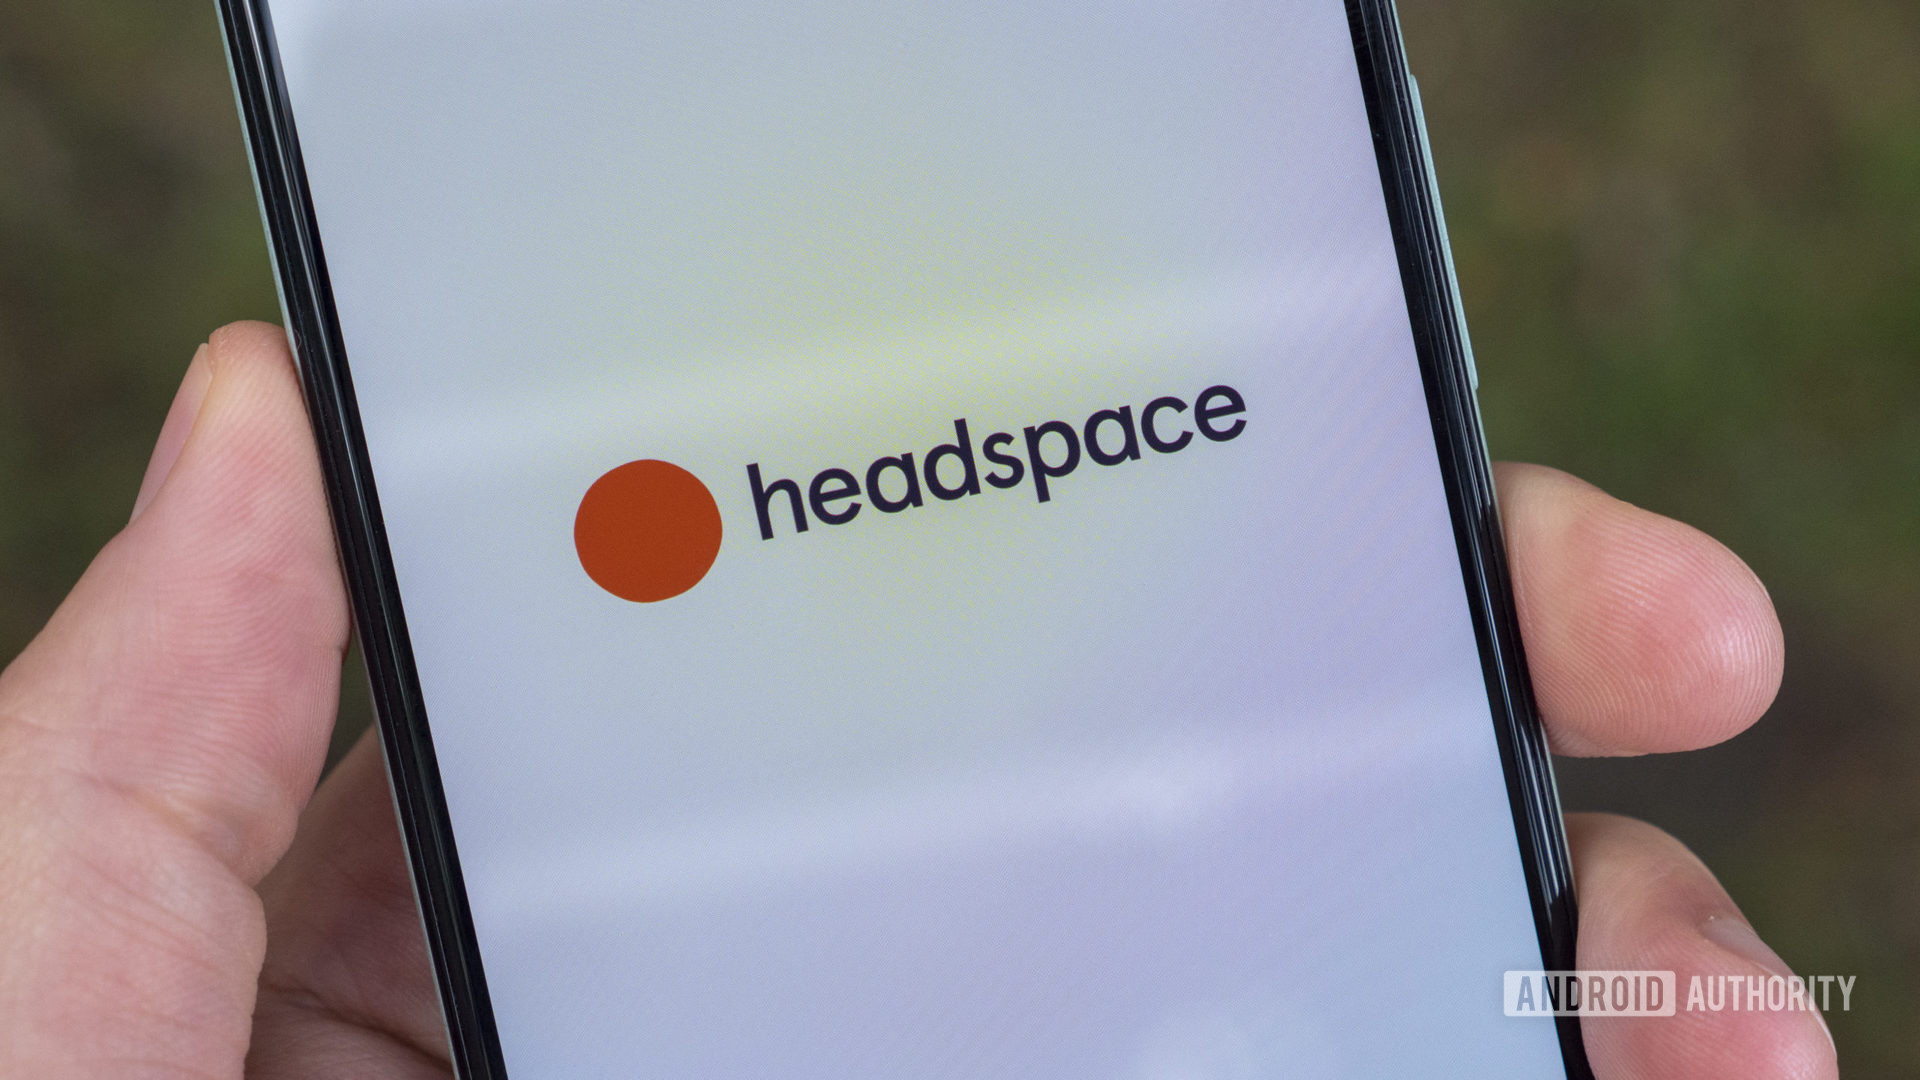 A user holds a smartphone in hand displaying the Headspace app logo.